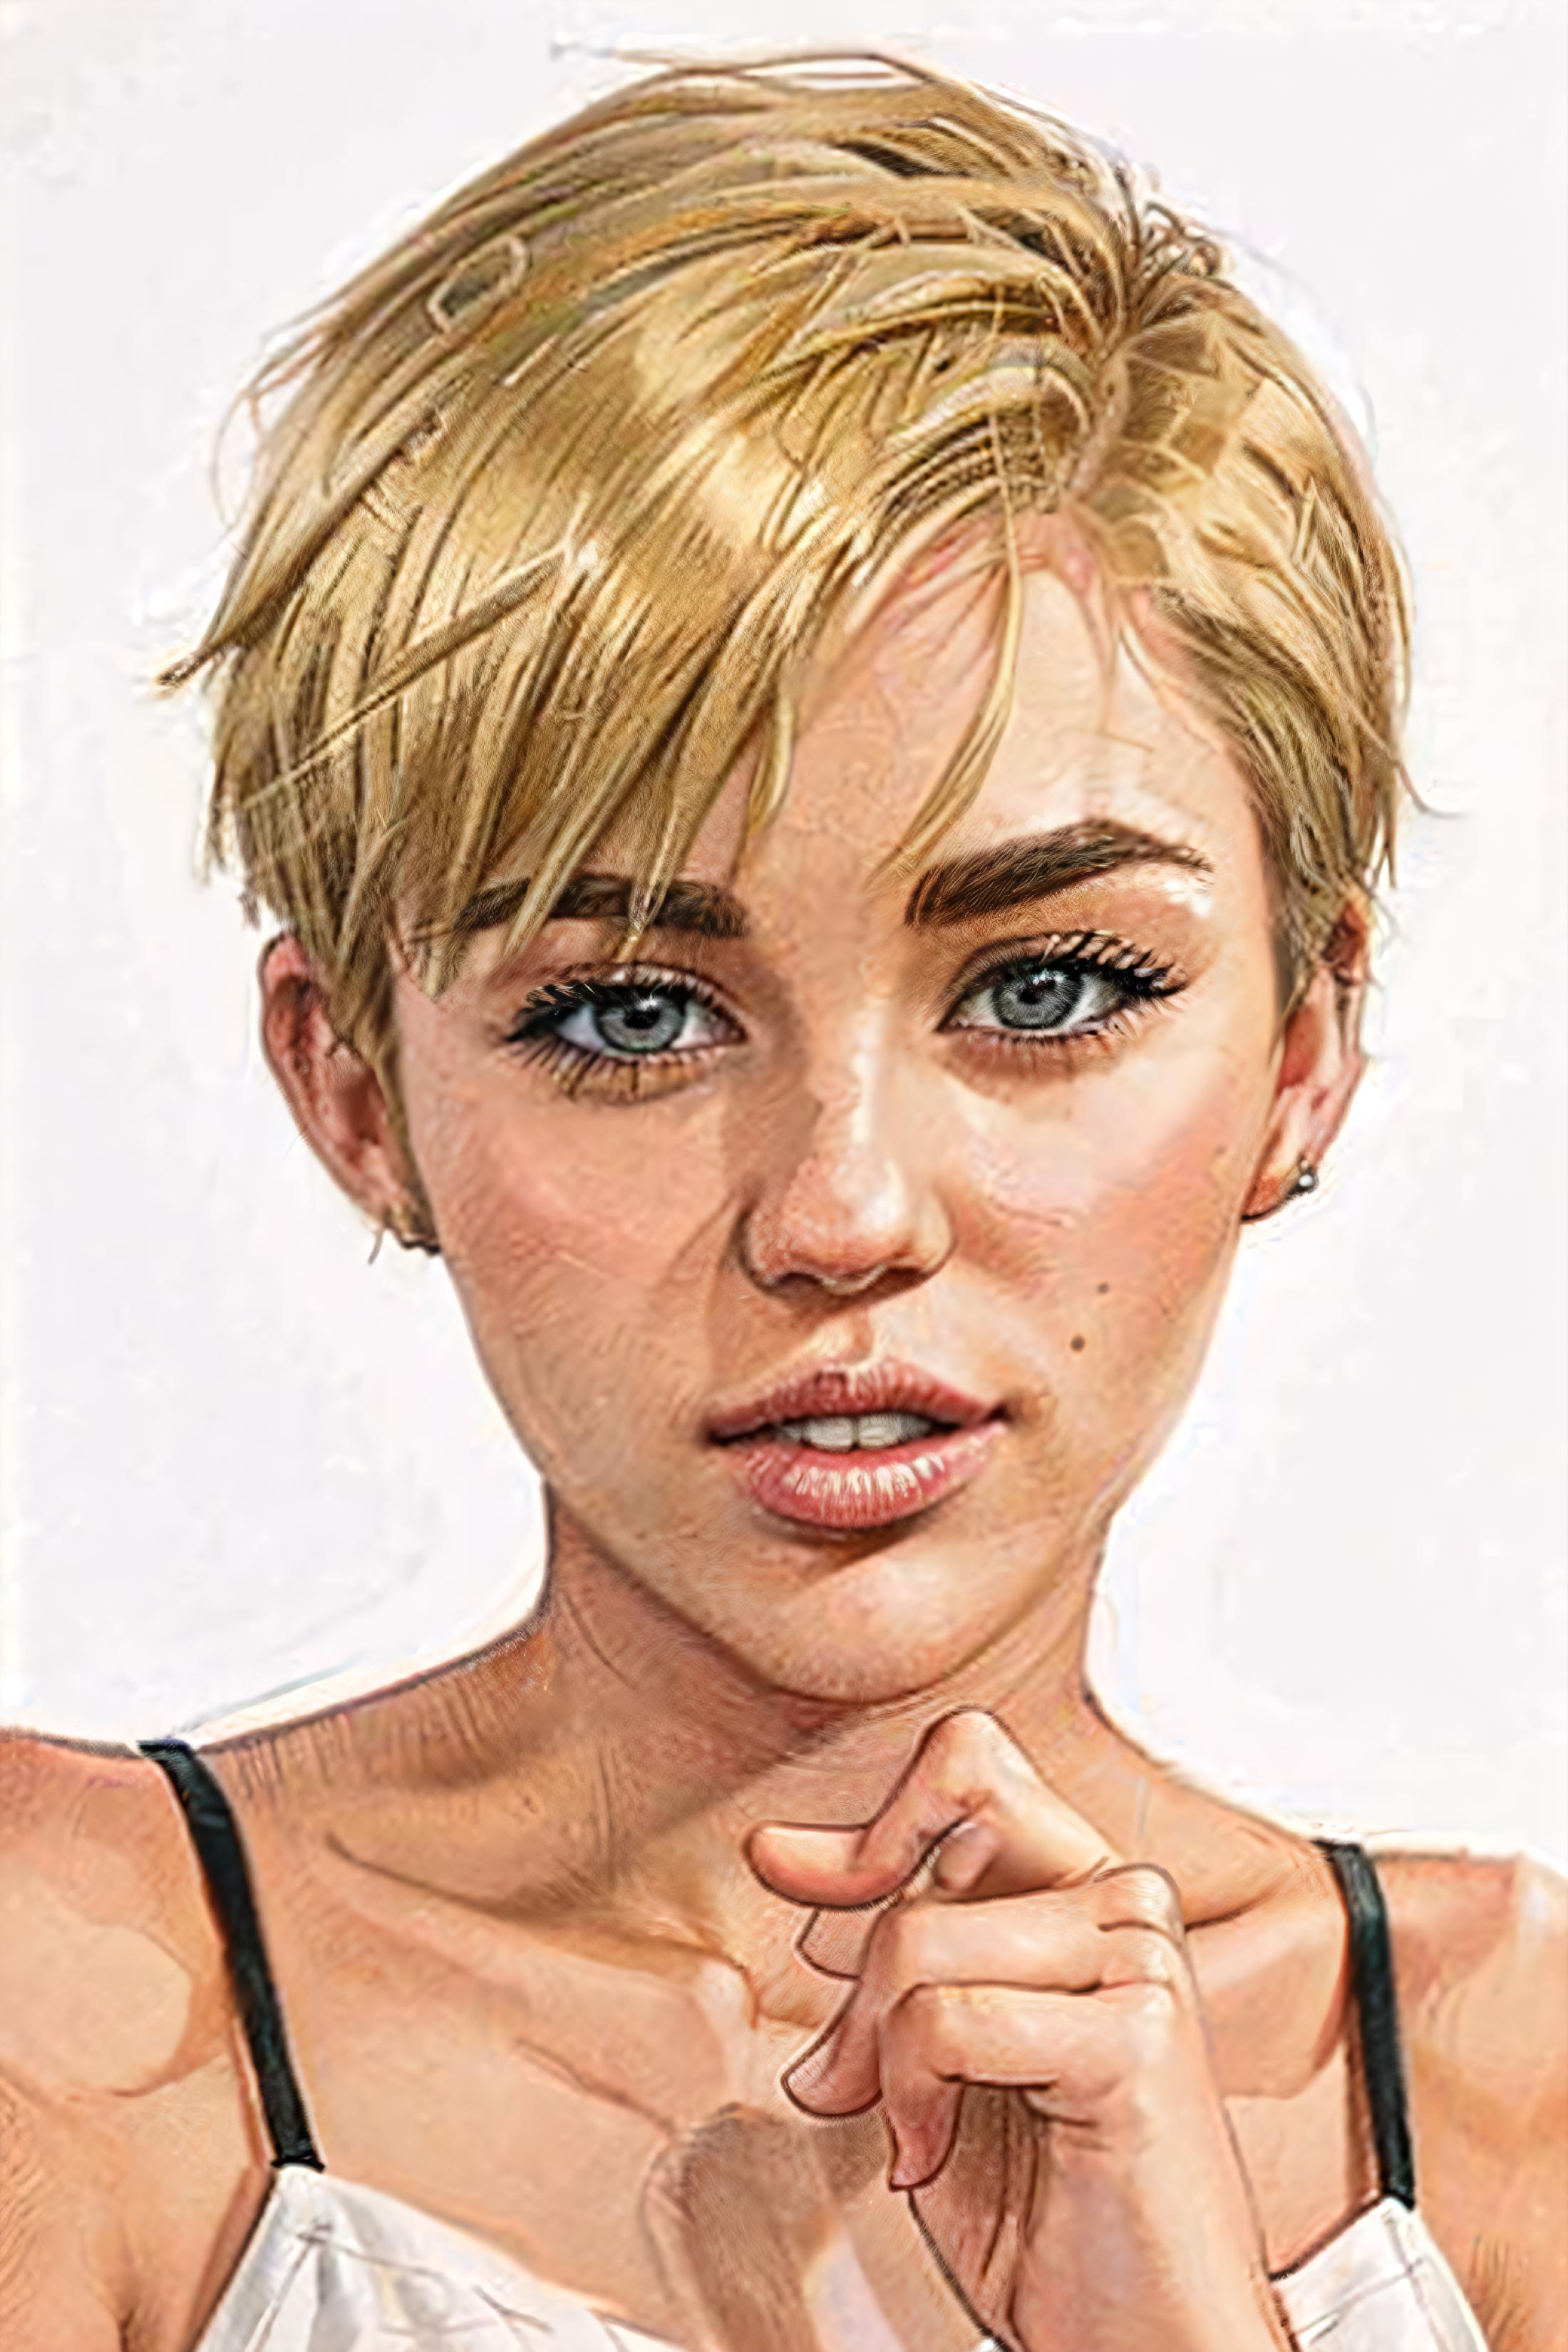 Miley Cyrus image by __2_